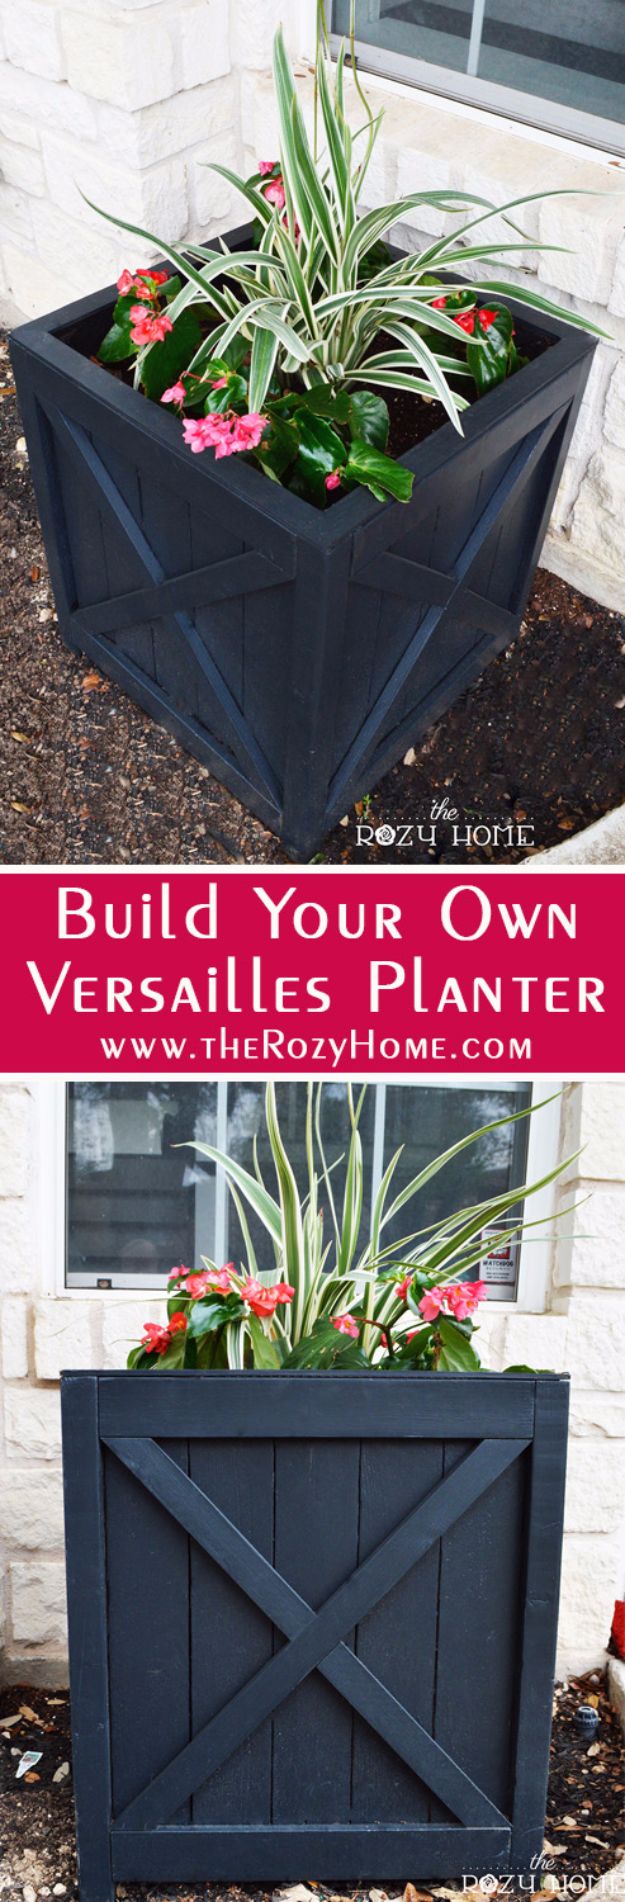 DIY Outdoor Planters - DIY Versailles Planter - Easy Planter Ideas to Make for The Porch, Pation and Backyard - Your Plants Will Love These DIY Plant Holders, Potting Ideas and Planter Boxes - Gardening DIY for Big and Small Plants Outdoors - Concrete, Wood, Cheap, Simple, Modern and Rustic Projects With Step by Step Instructions 